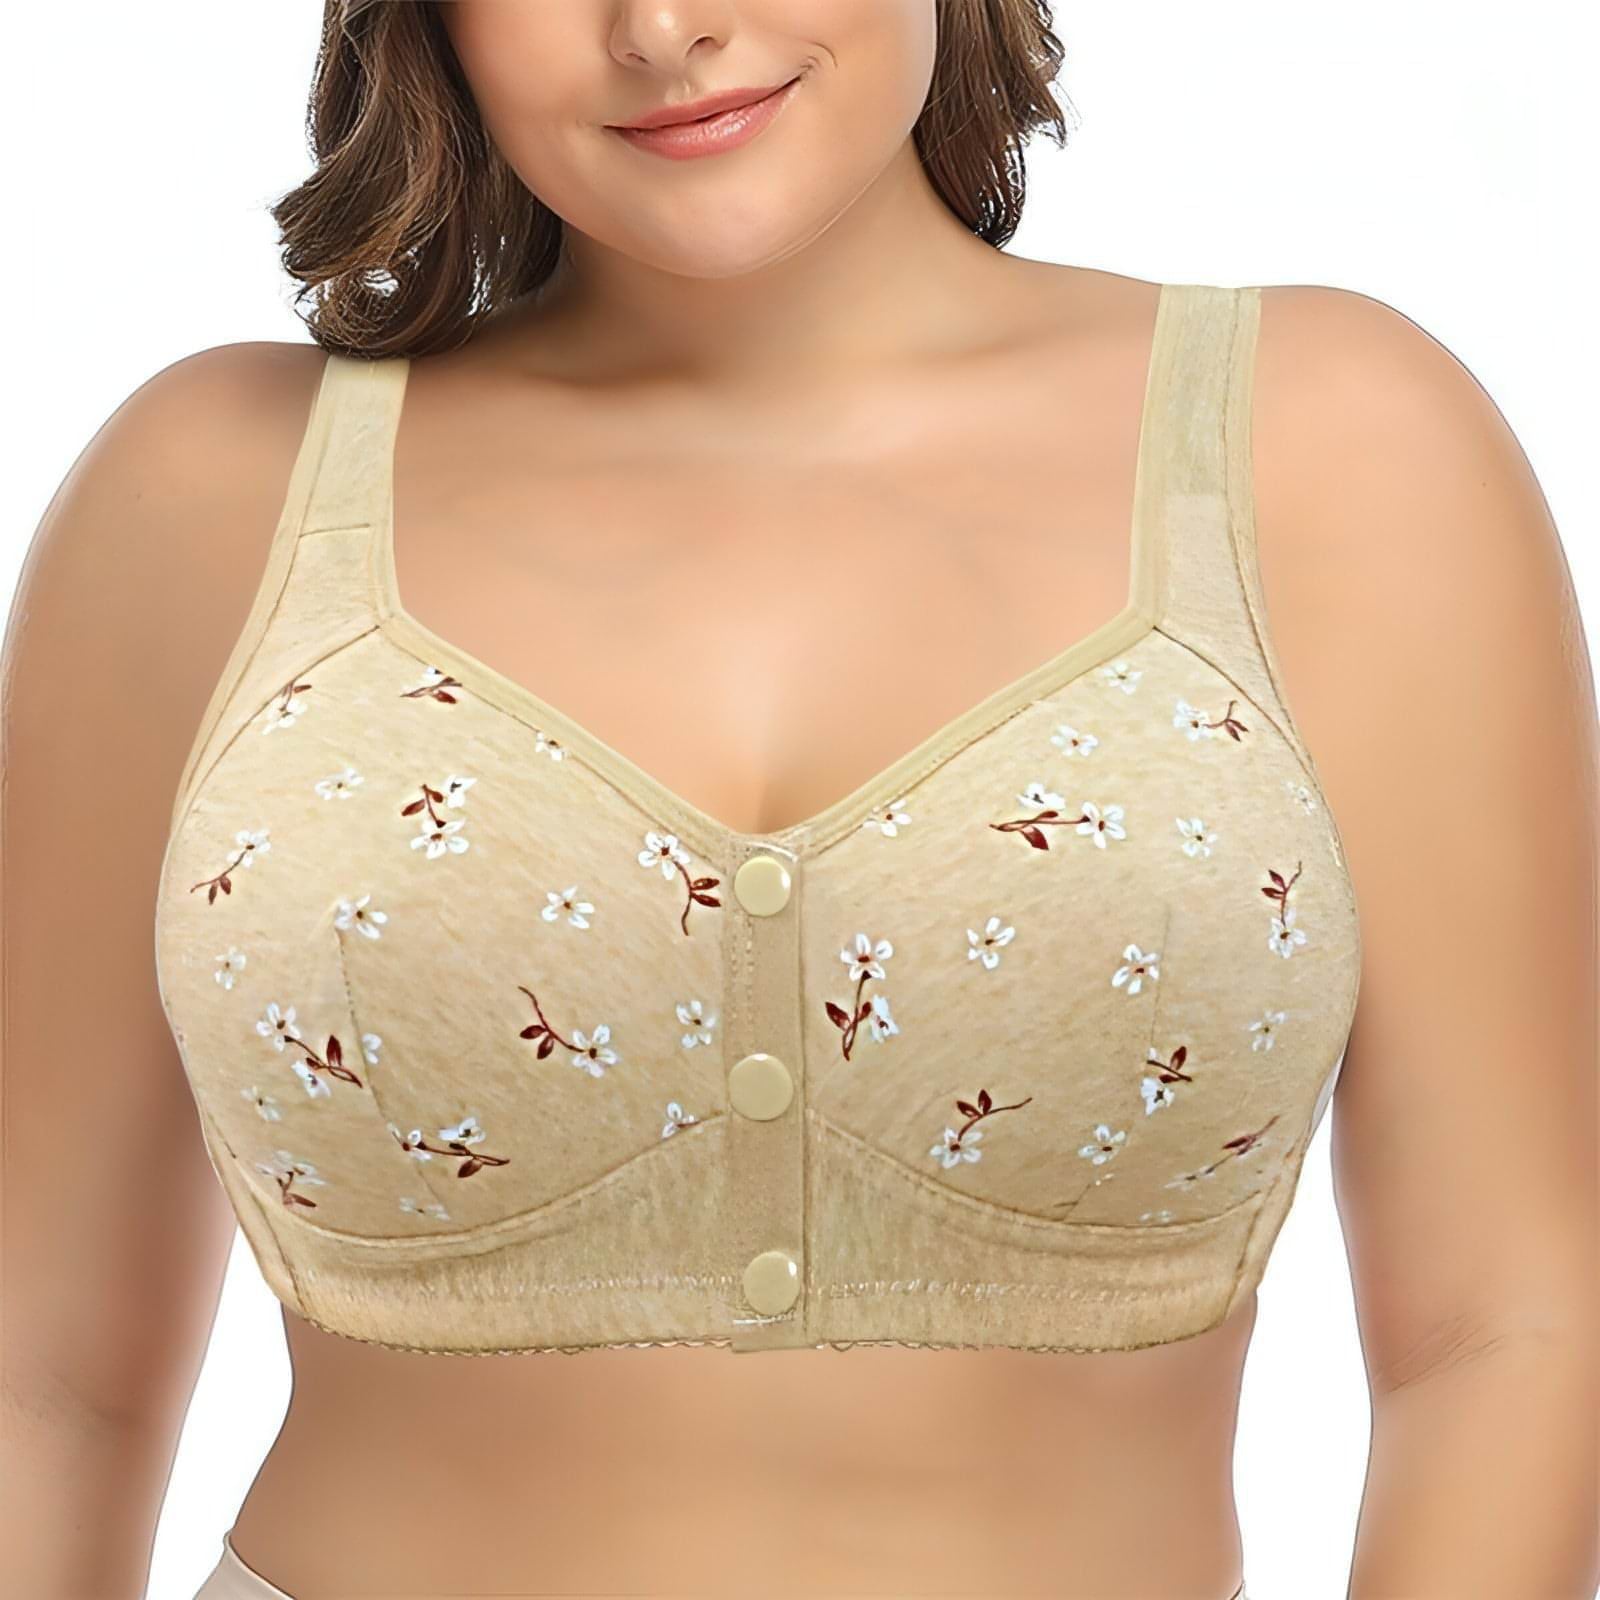 Large Size Front Button Bra Comfortable Gather Bra